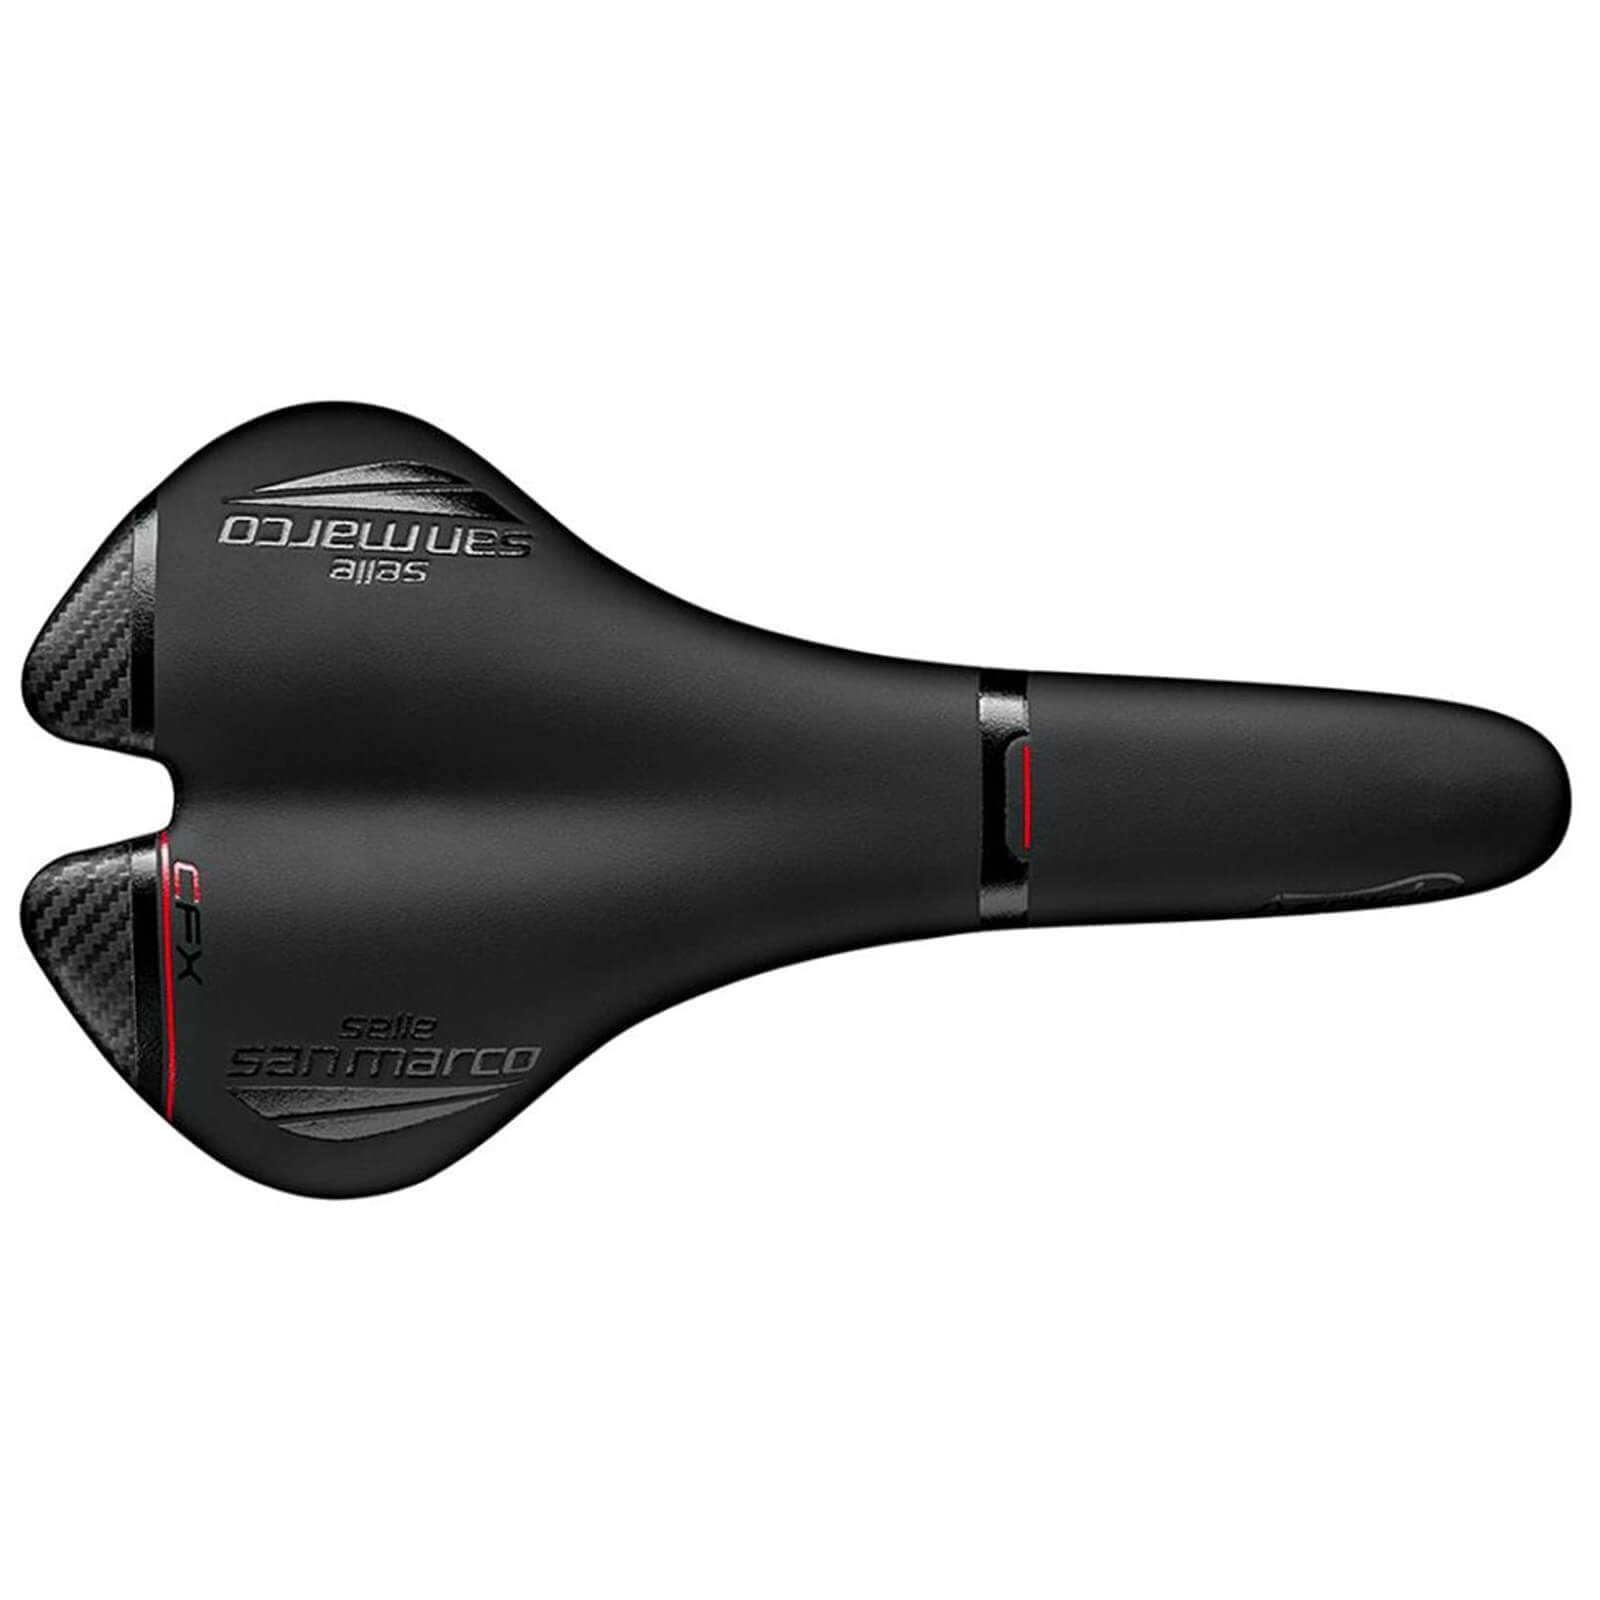 Selle San Marco Aspide Full-Fit Carbon FX Saddle - Narrow/S1